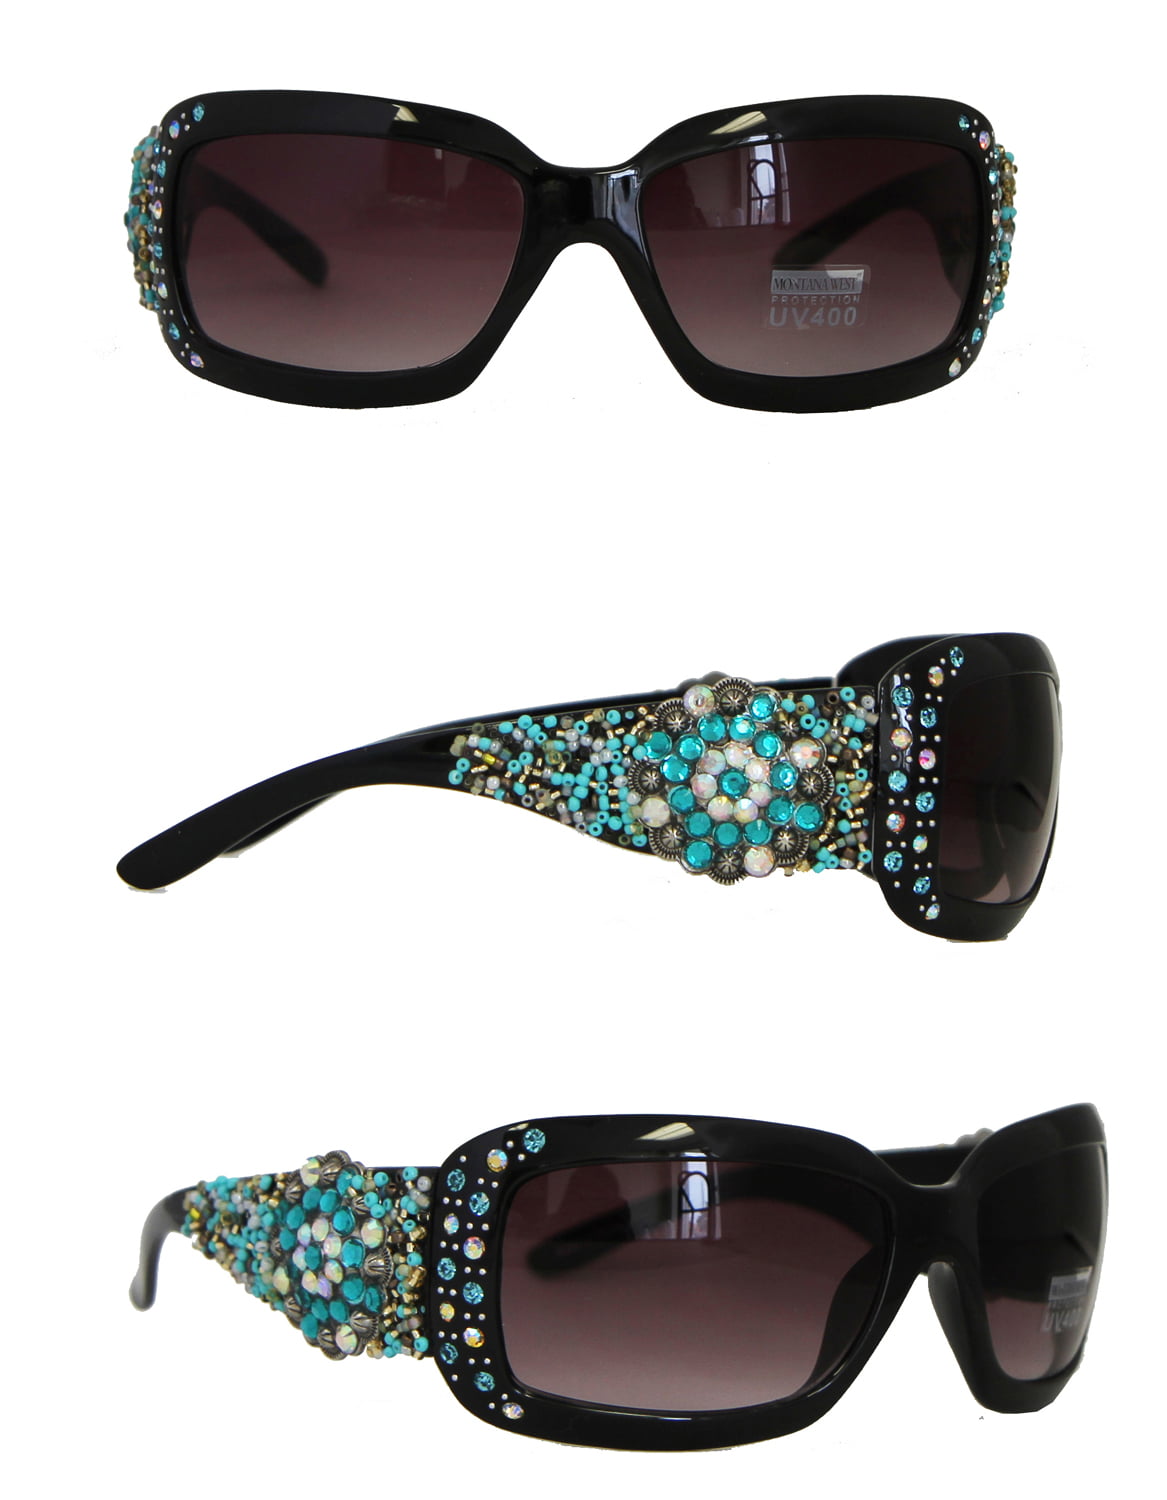 Montana West Sunglasses for Women UV 400 Western Rhinestones Concho Bling Bling Collection Ladies Sunglasses 